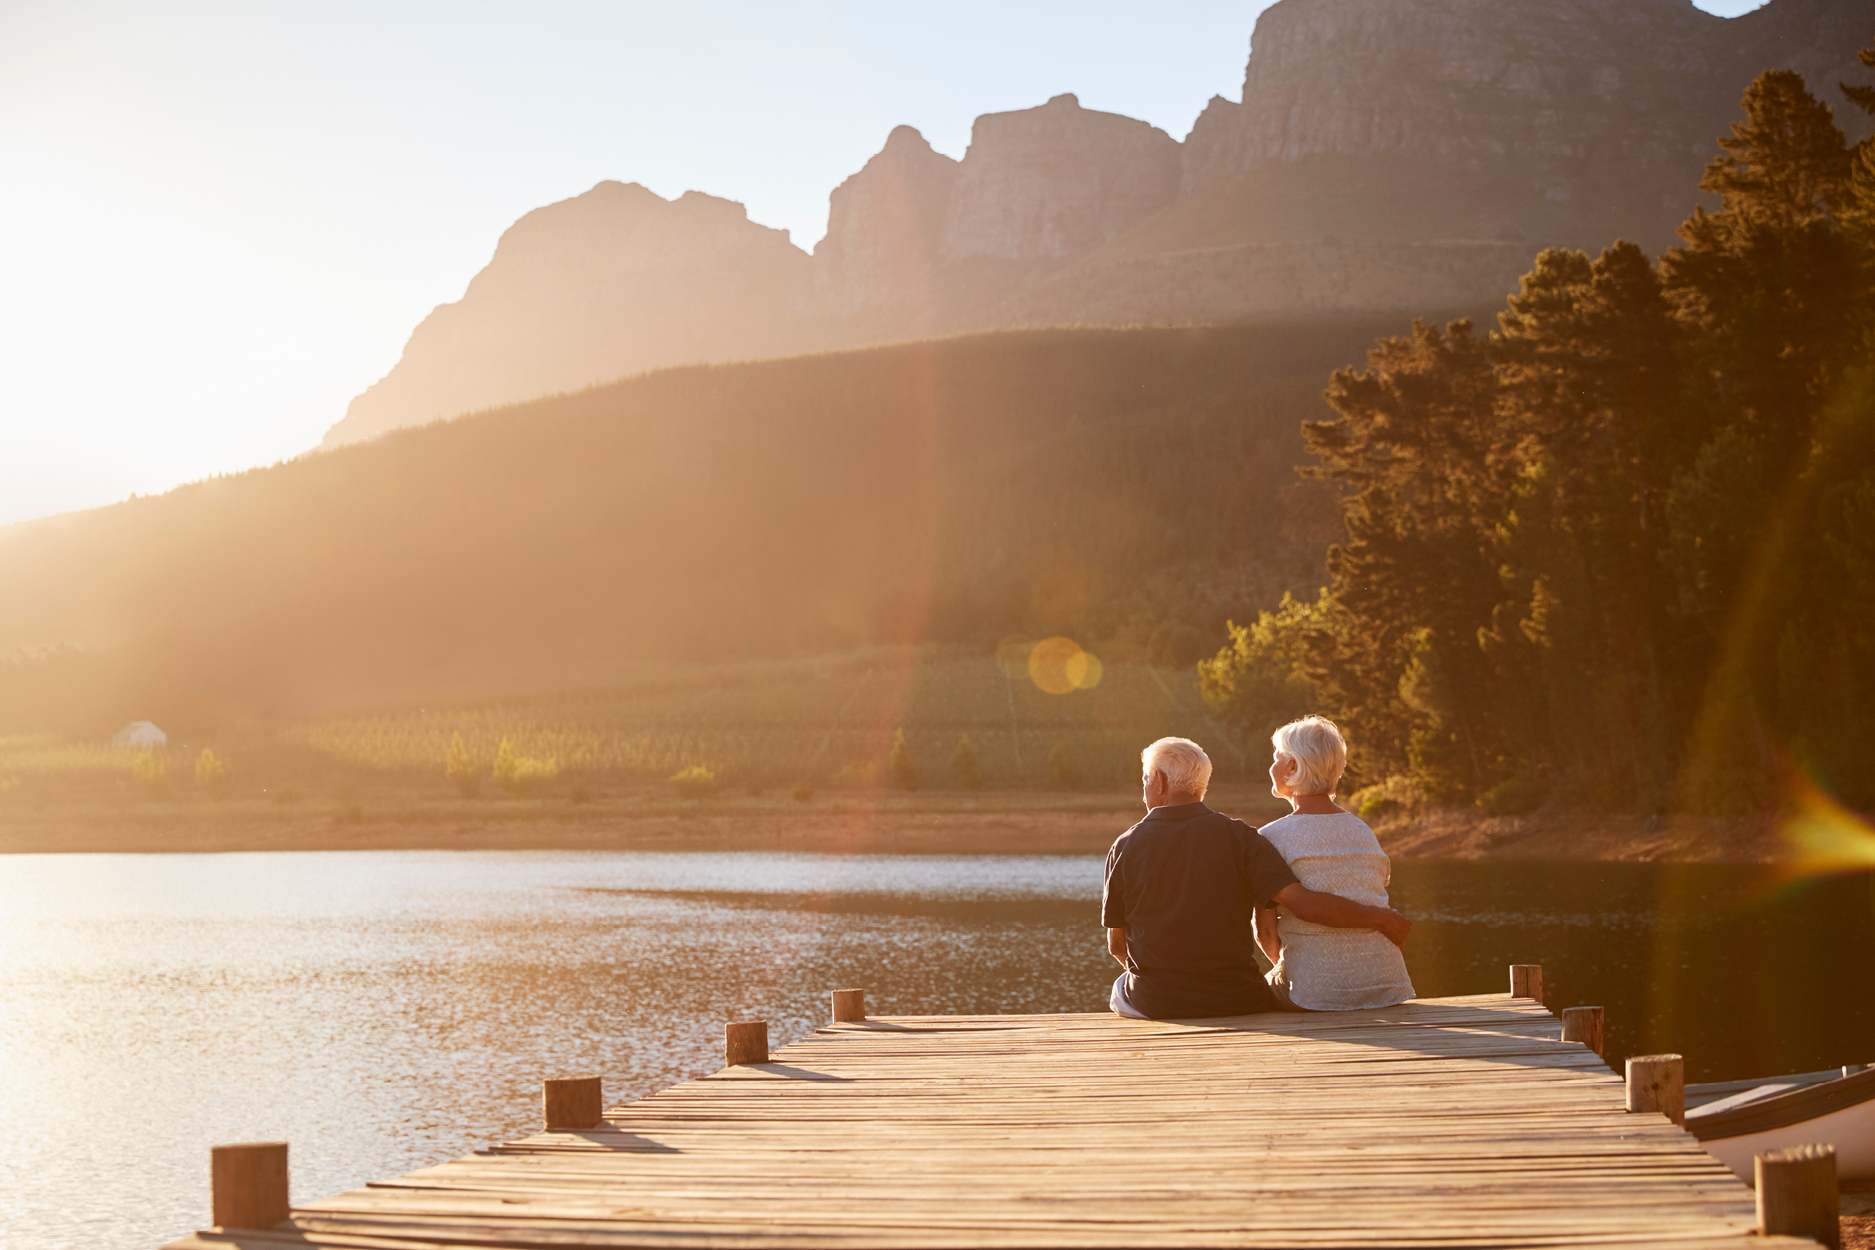 An older couple sitting at the end of a dock watching the sun set over a lake